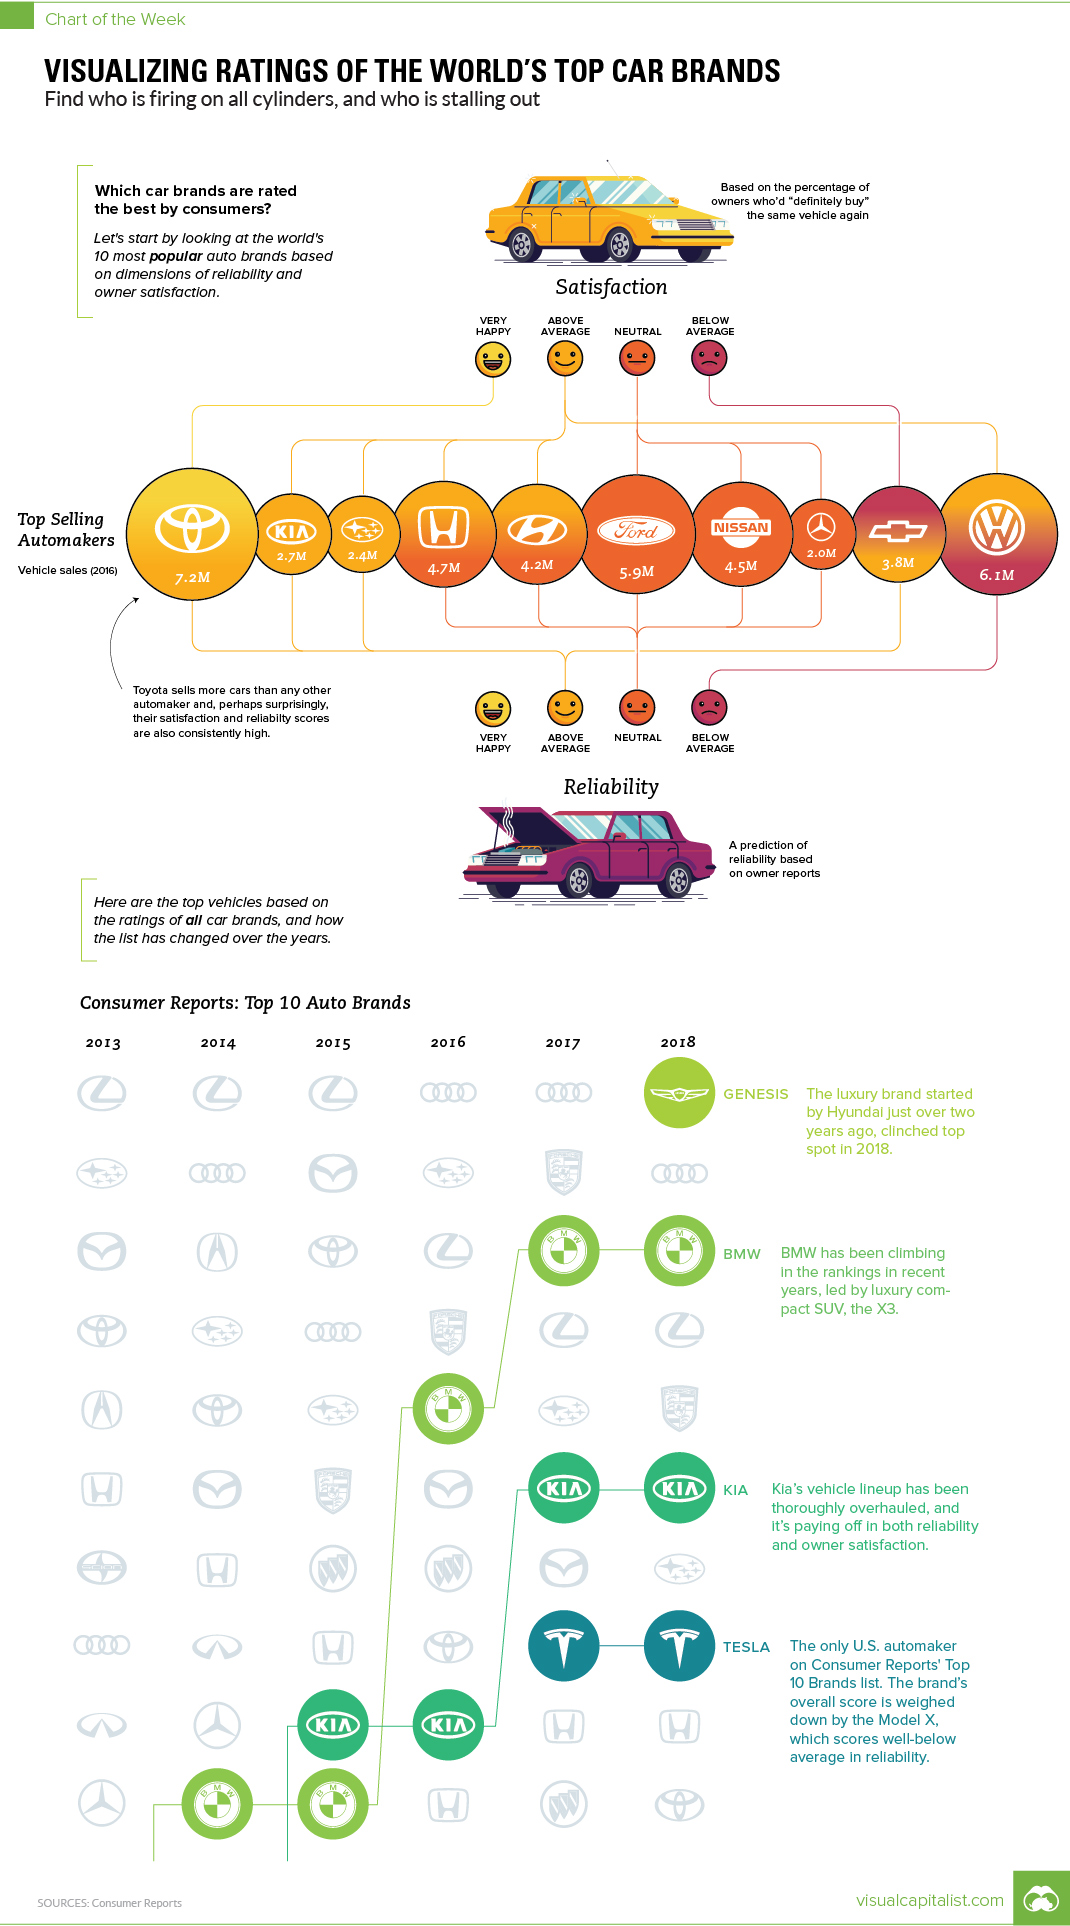 Visualizing Ratings of the World's Top Car Brands